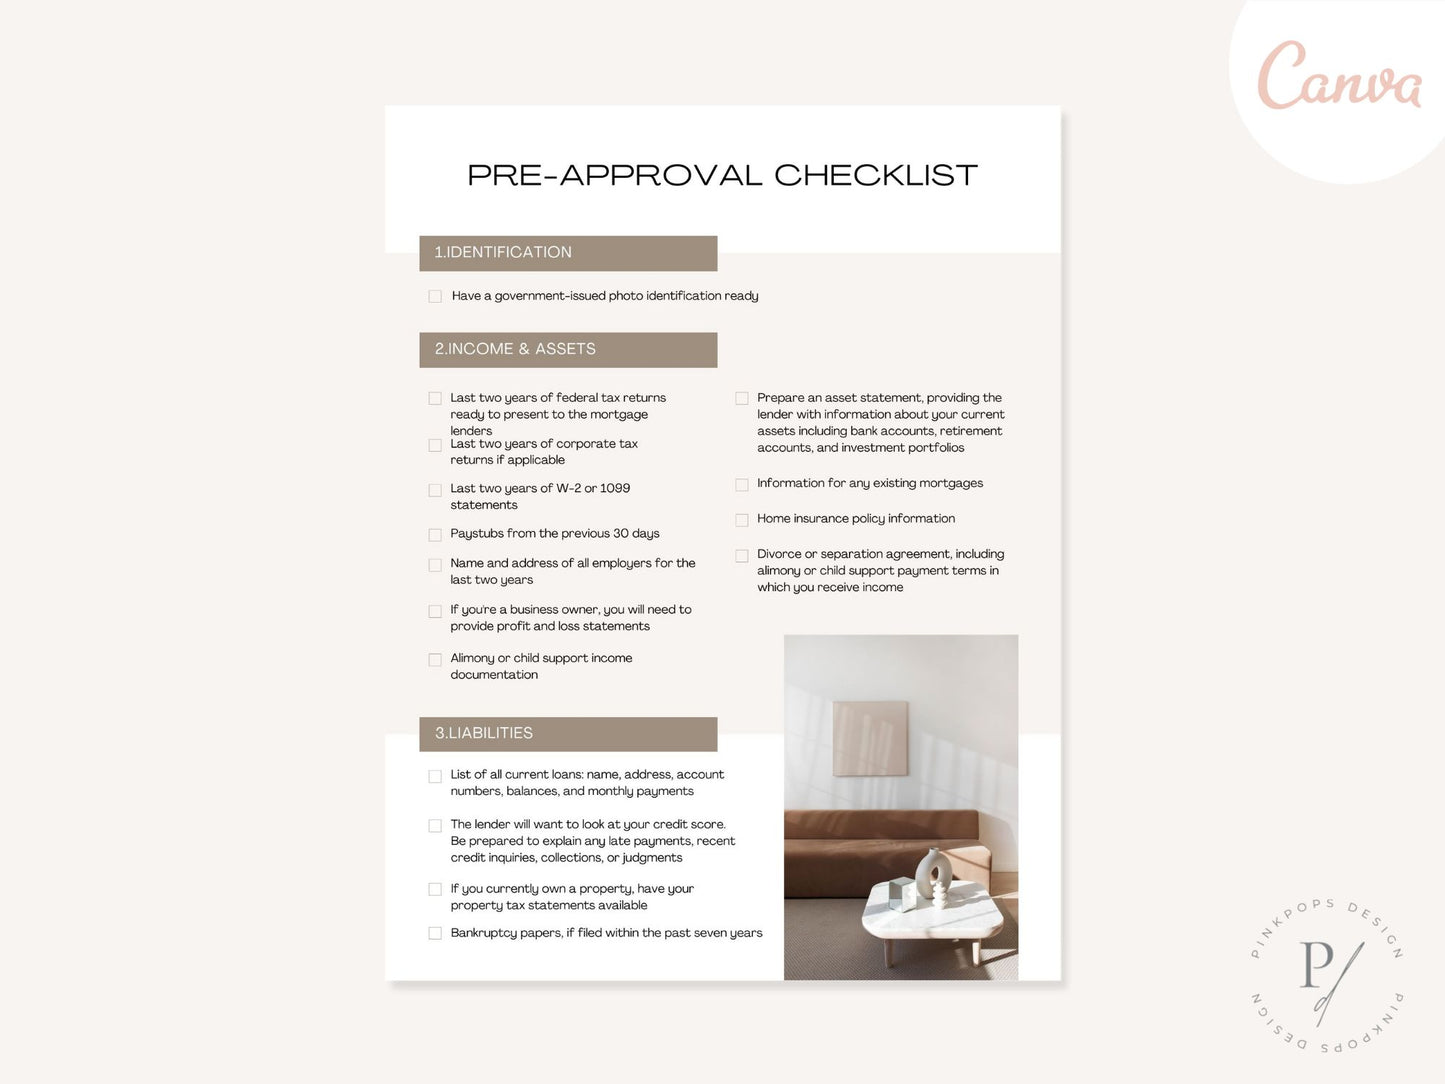 Real Estate Luxury Pre-Approval Checklist - Refined guide for a seamless pre-approval process in the luxury real estate market.